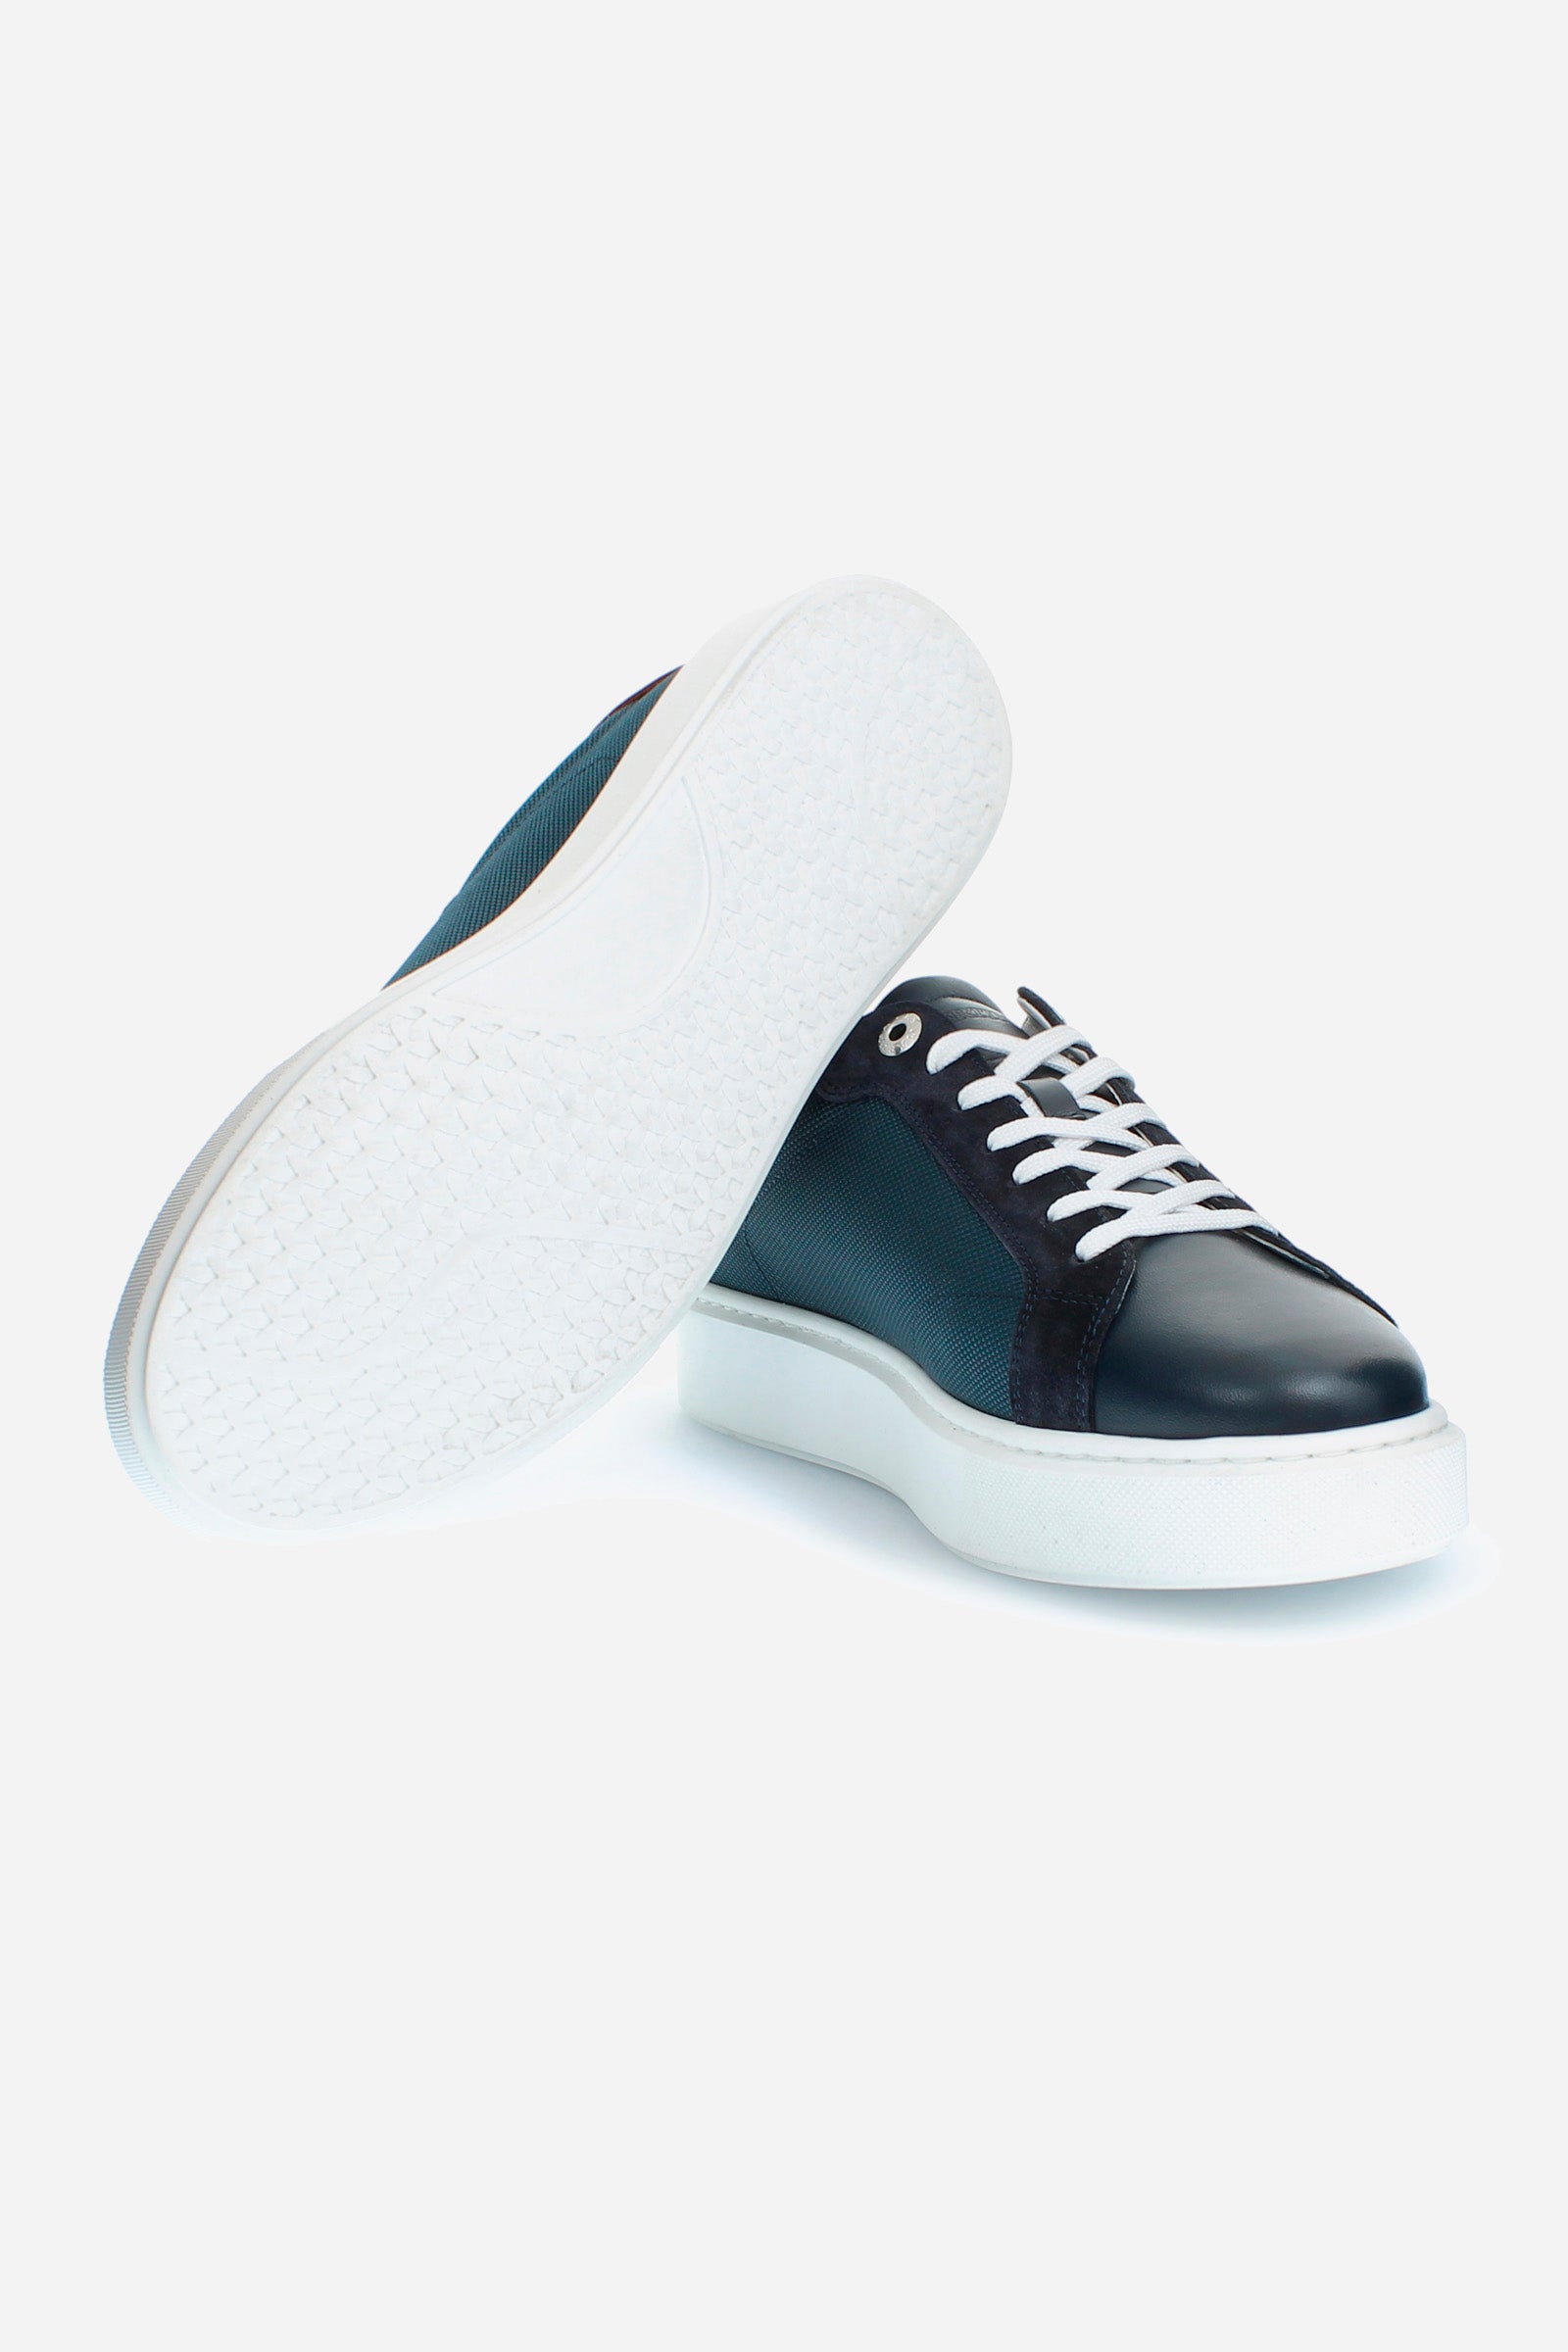 Men's trainers in leather and suede